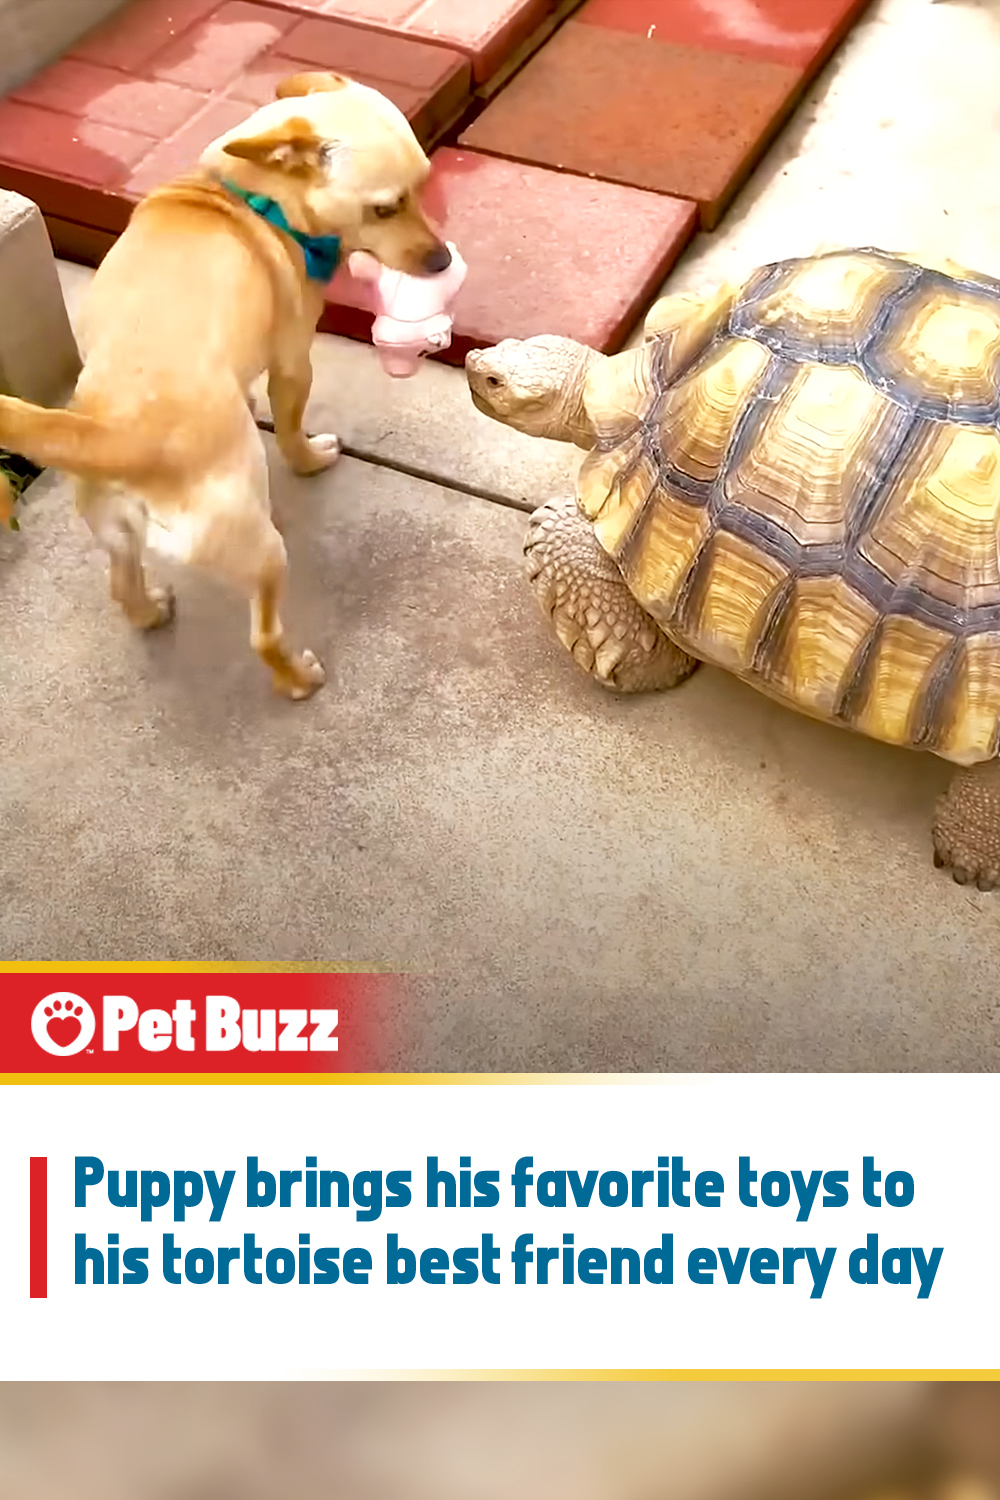 Puppy brings his favorite toys to his tortoise best friend every day